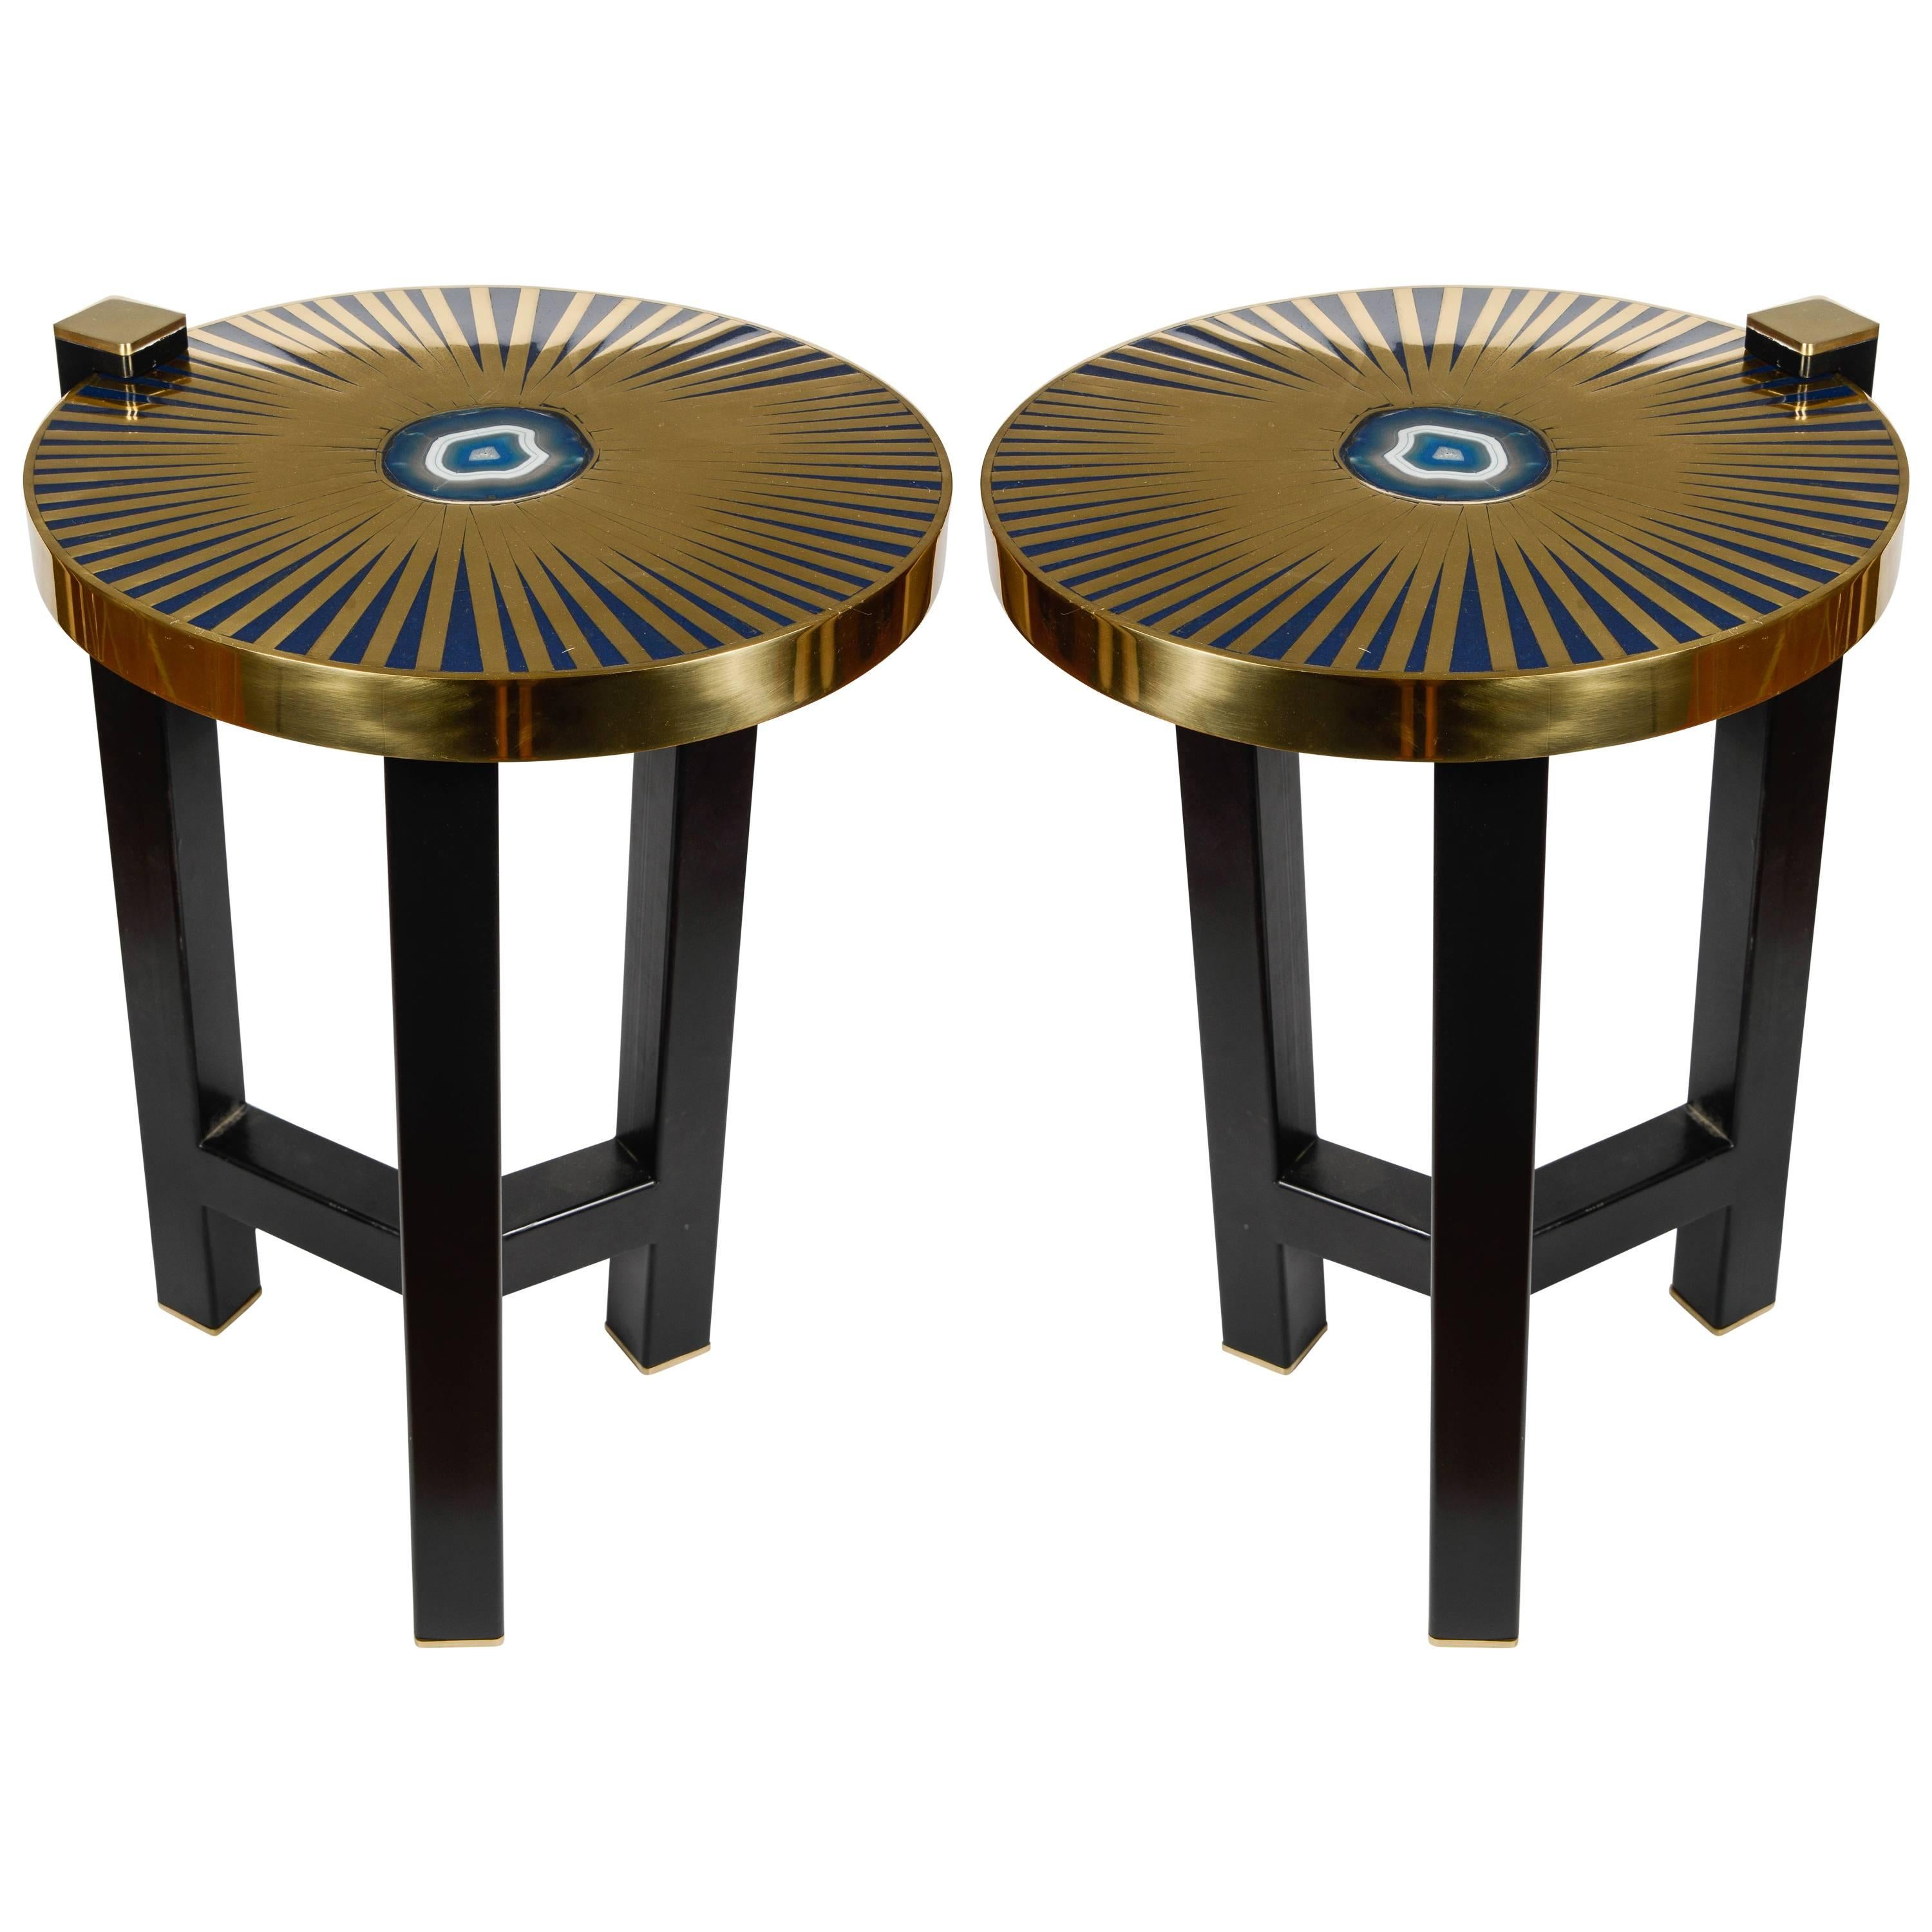 Fantastic Pair of Lighting Side Tables by Dessauvage